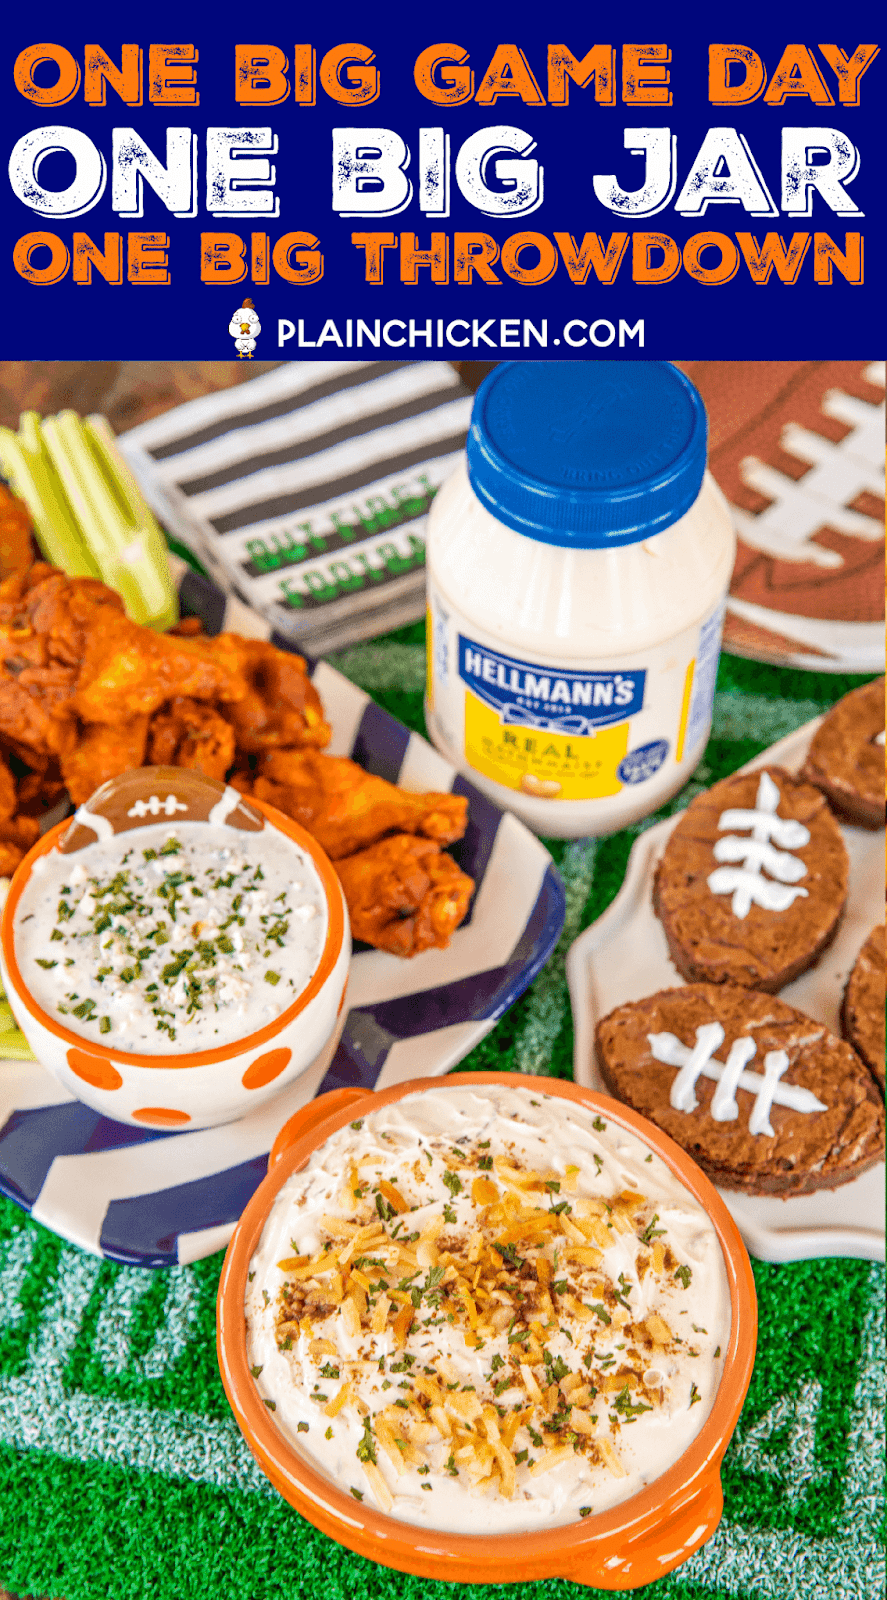 3 Easy Game Day Snacks made with Hellmann's/Best Foods Mayonnaise. 3 Ingredient Creamy Onion Dip, Blue Cheese Ranch Dip and Mayonnaise Brownies!